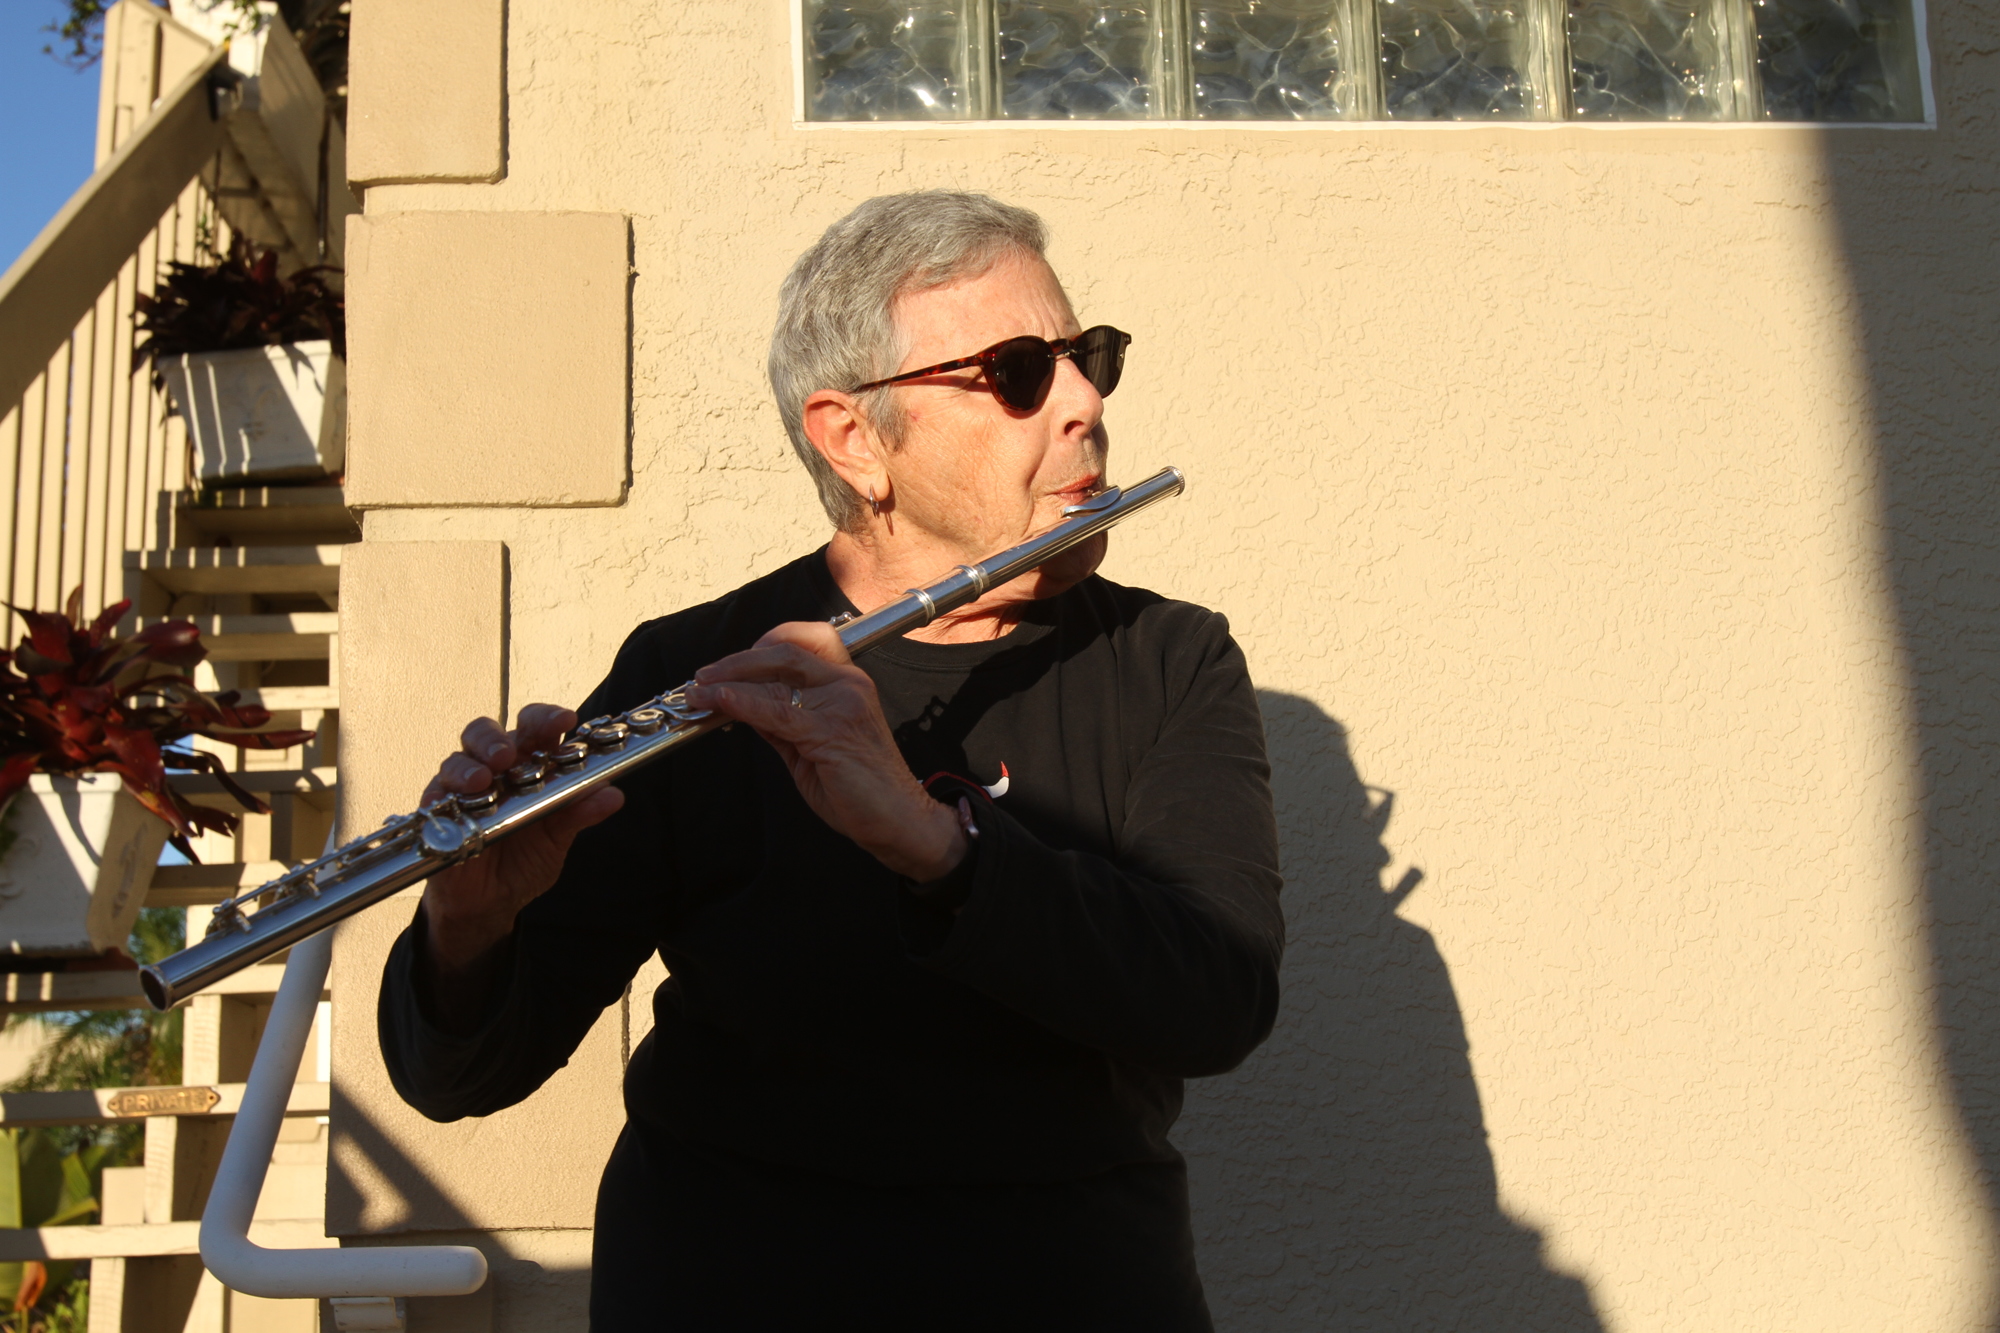 Cary Jacobs has adjusted well to playing flute solo and with a smaller number of people.